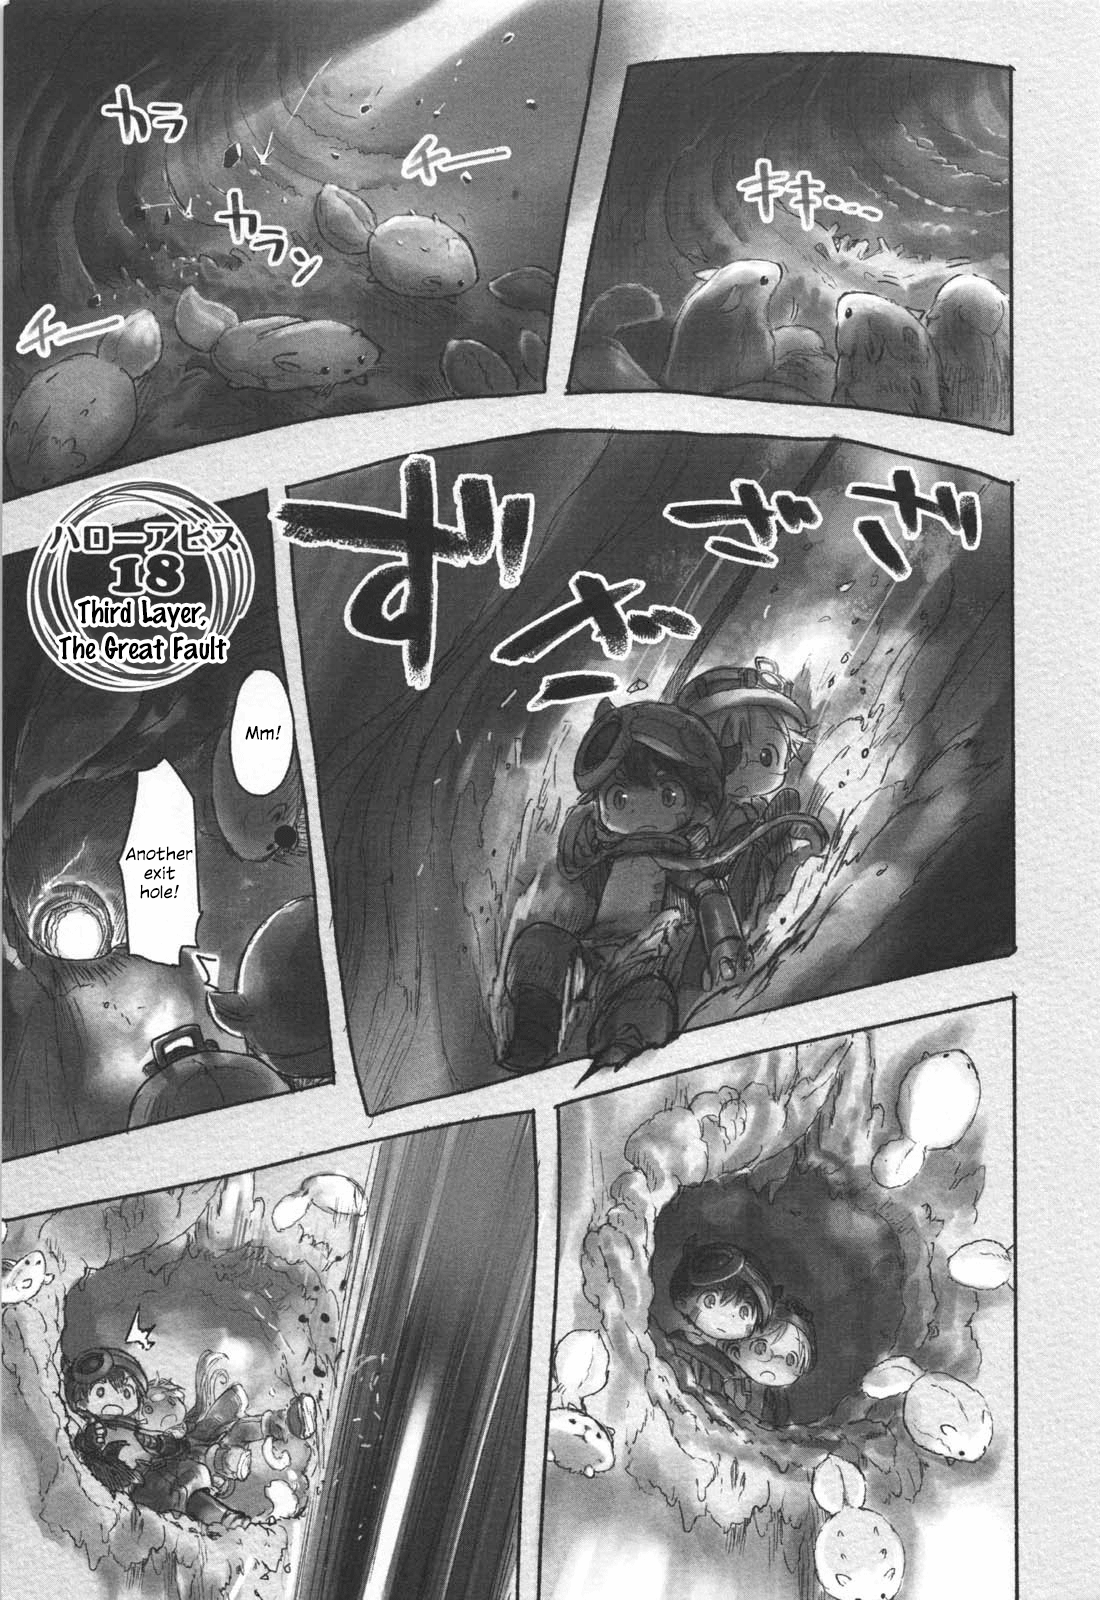 Made in Abyss Vol. 3